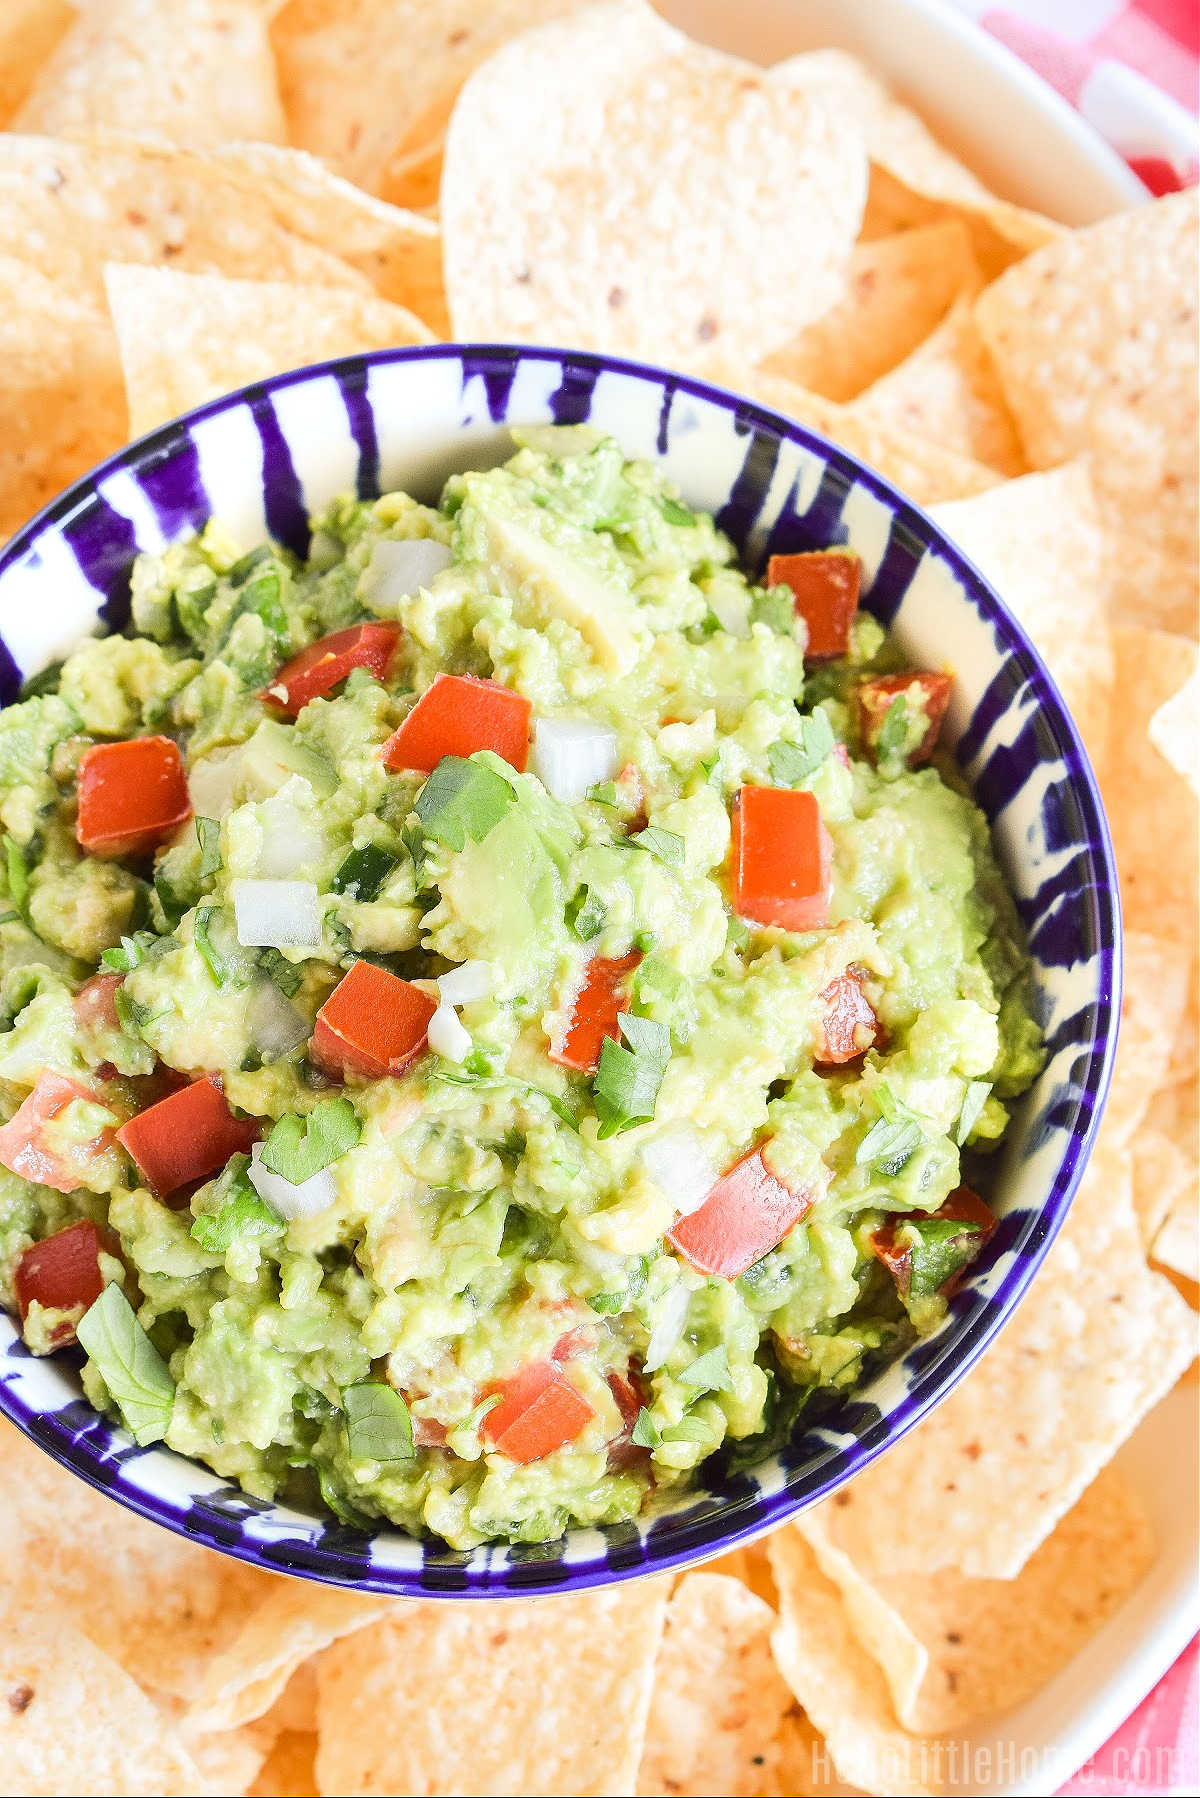 A bowl of guac and tortilla chips on a platter.